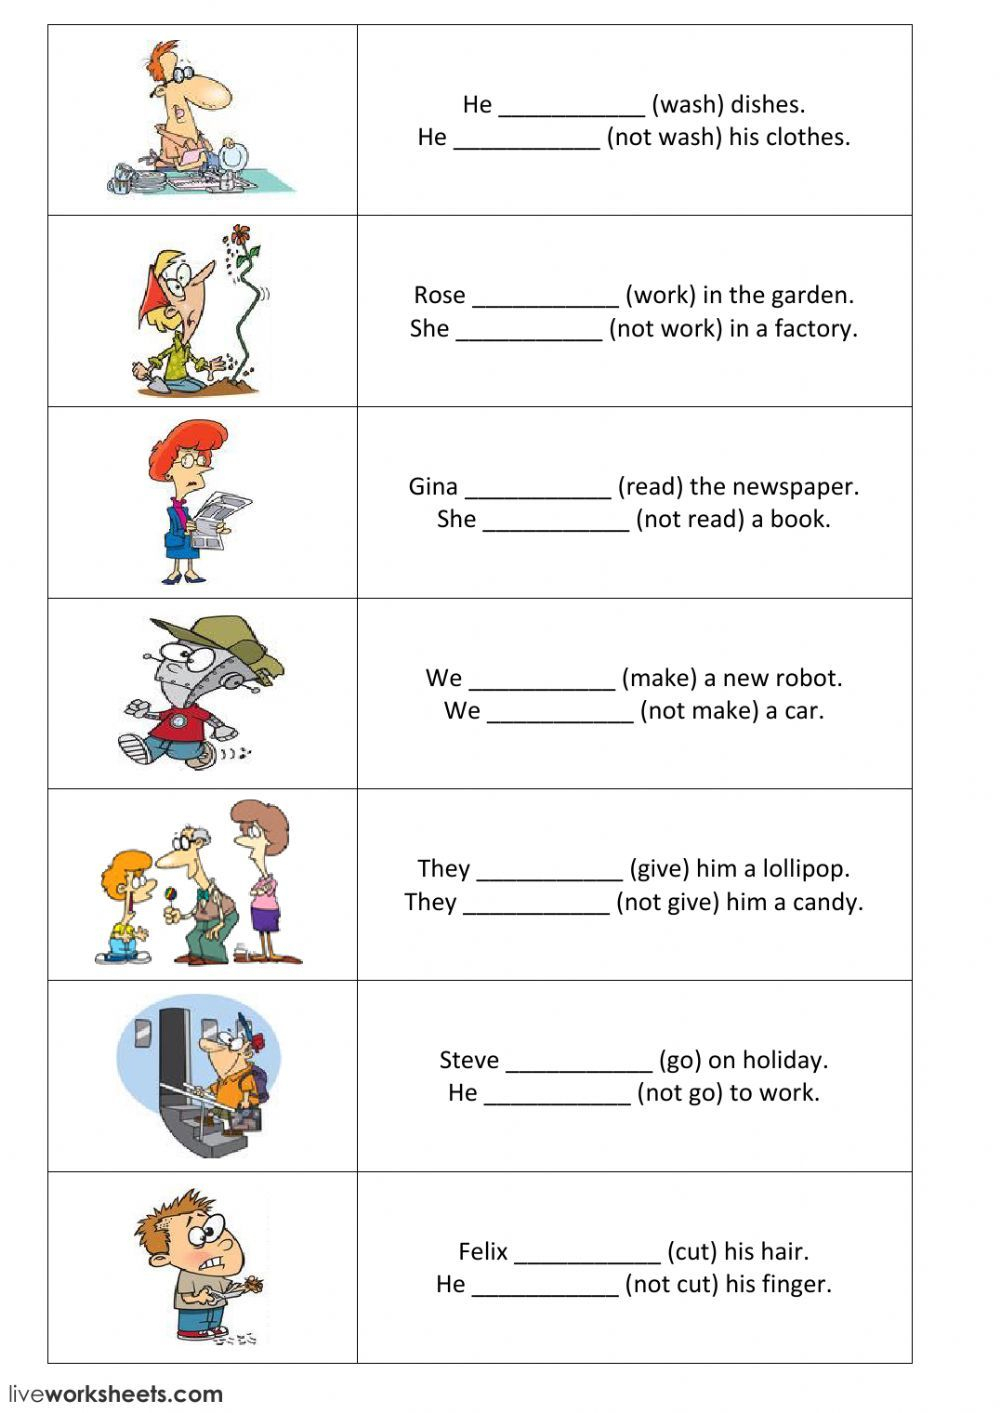 Present Simple Interactive And Downloadable Worksheet. You concernant Present Simple Exercises